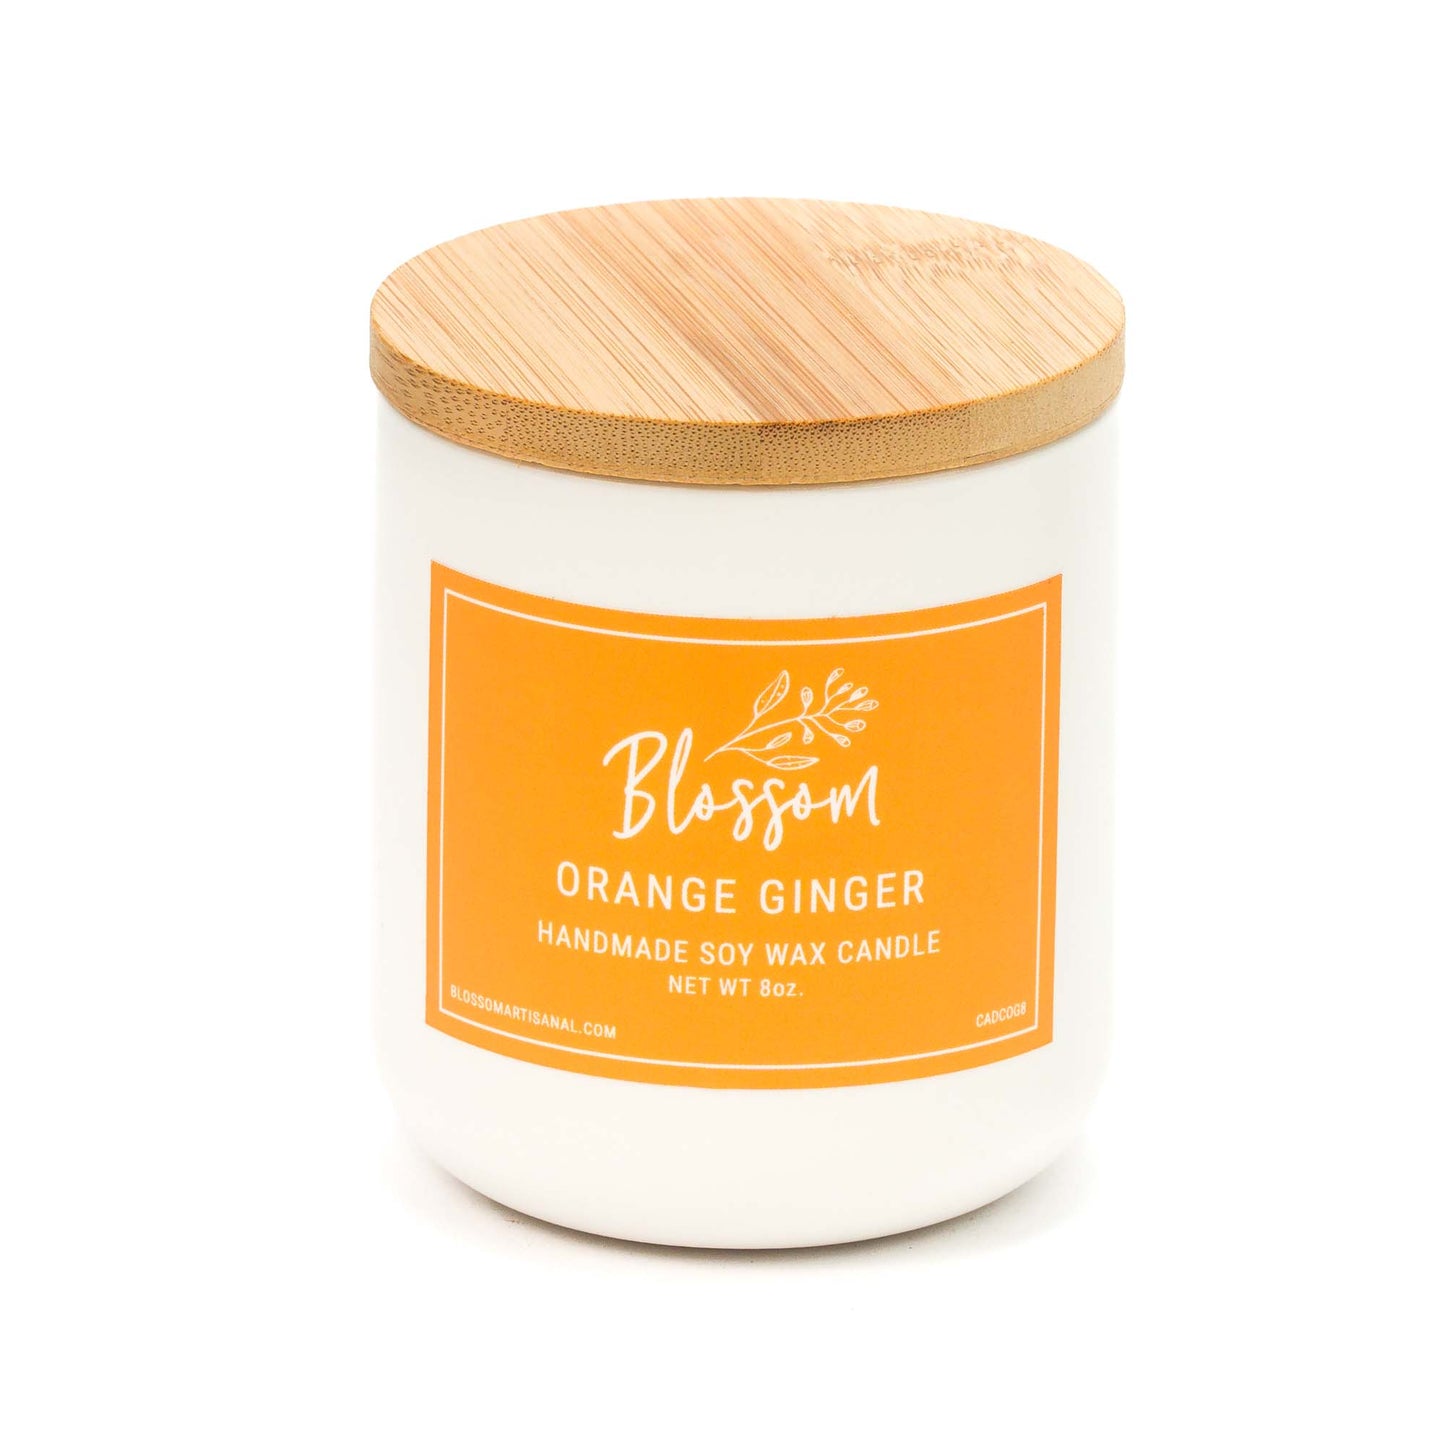 White Ceramic Decorative Soy Wax Candle Essential Oil Scent 8oz Orange Ginger